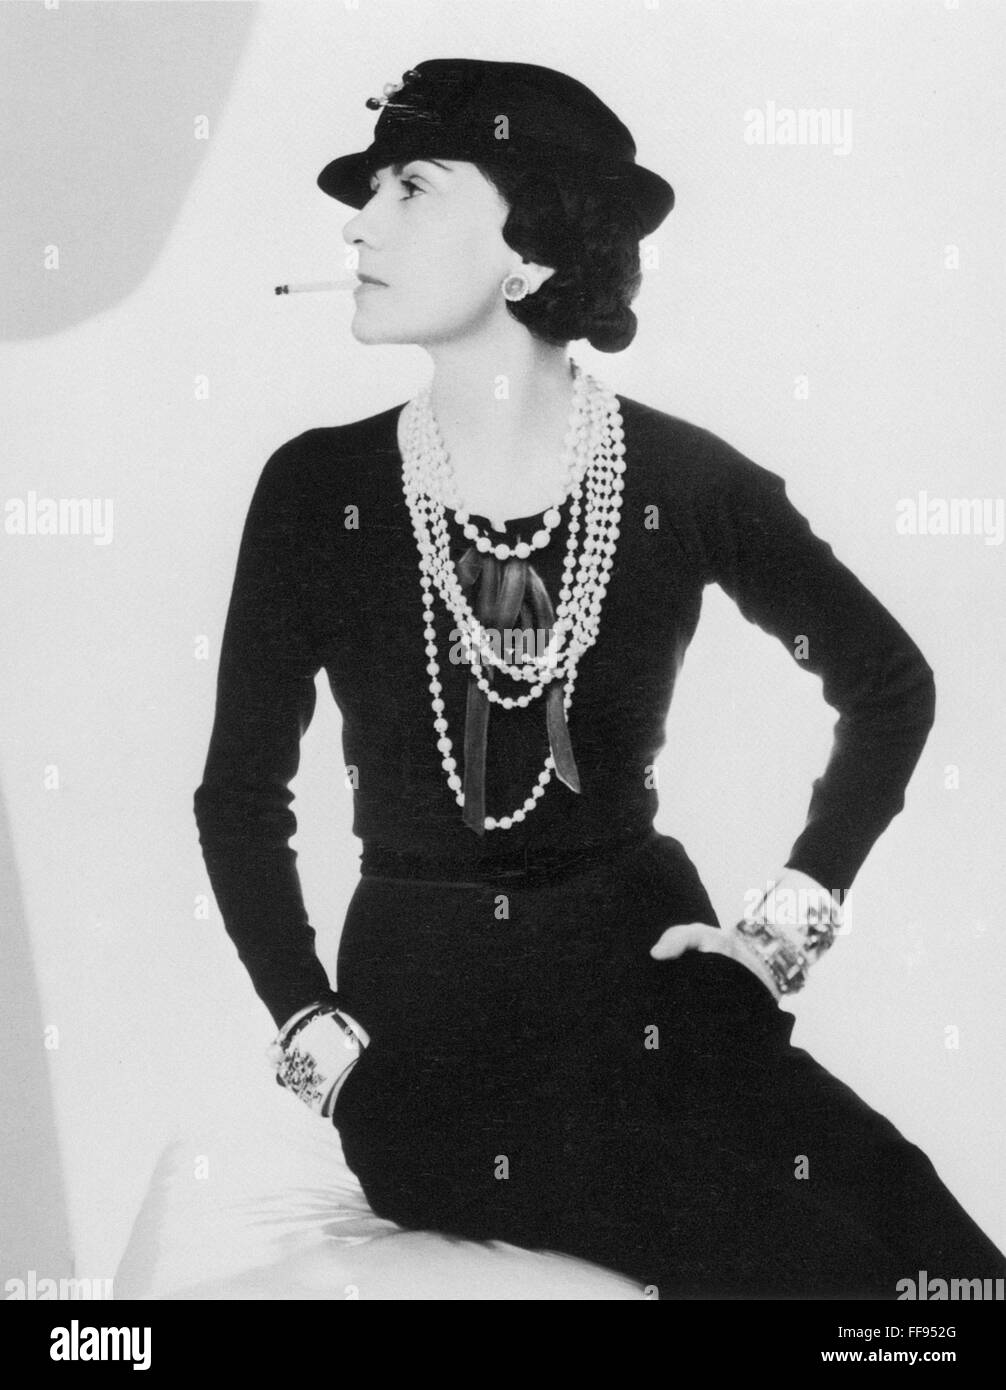 GABRIELLE 'COCO' CHANEL /n(1883-1971). French dress designer. Photograph  c1935 by Man Ray Stock Photo - Alamy